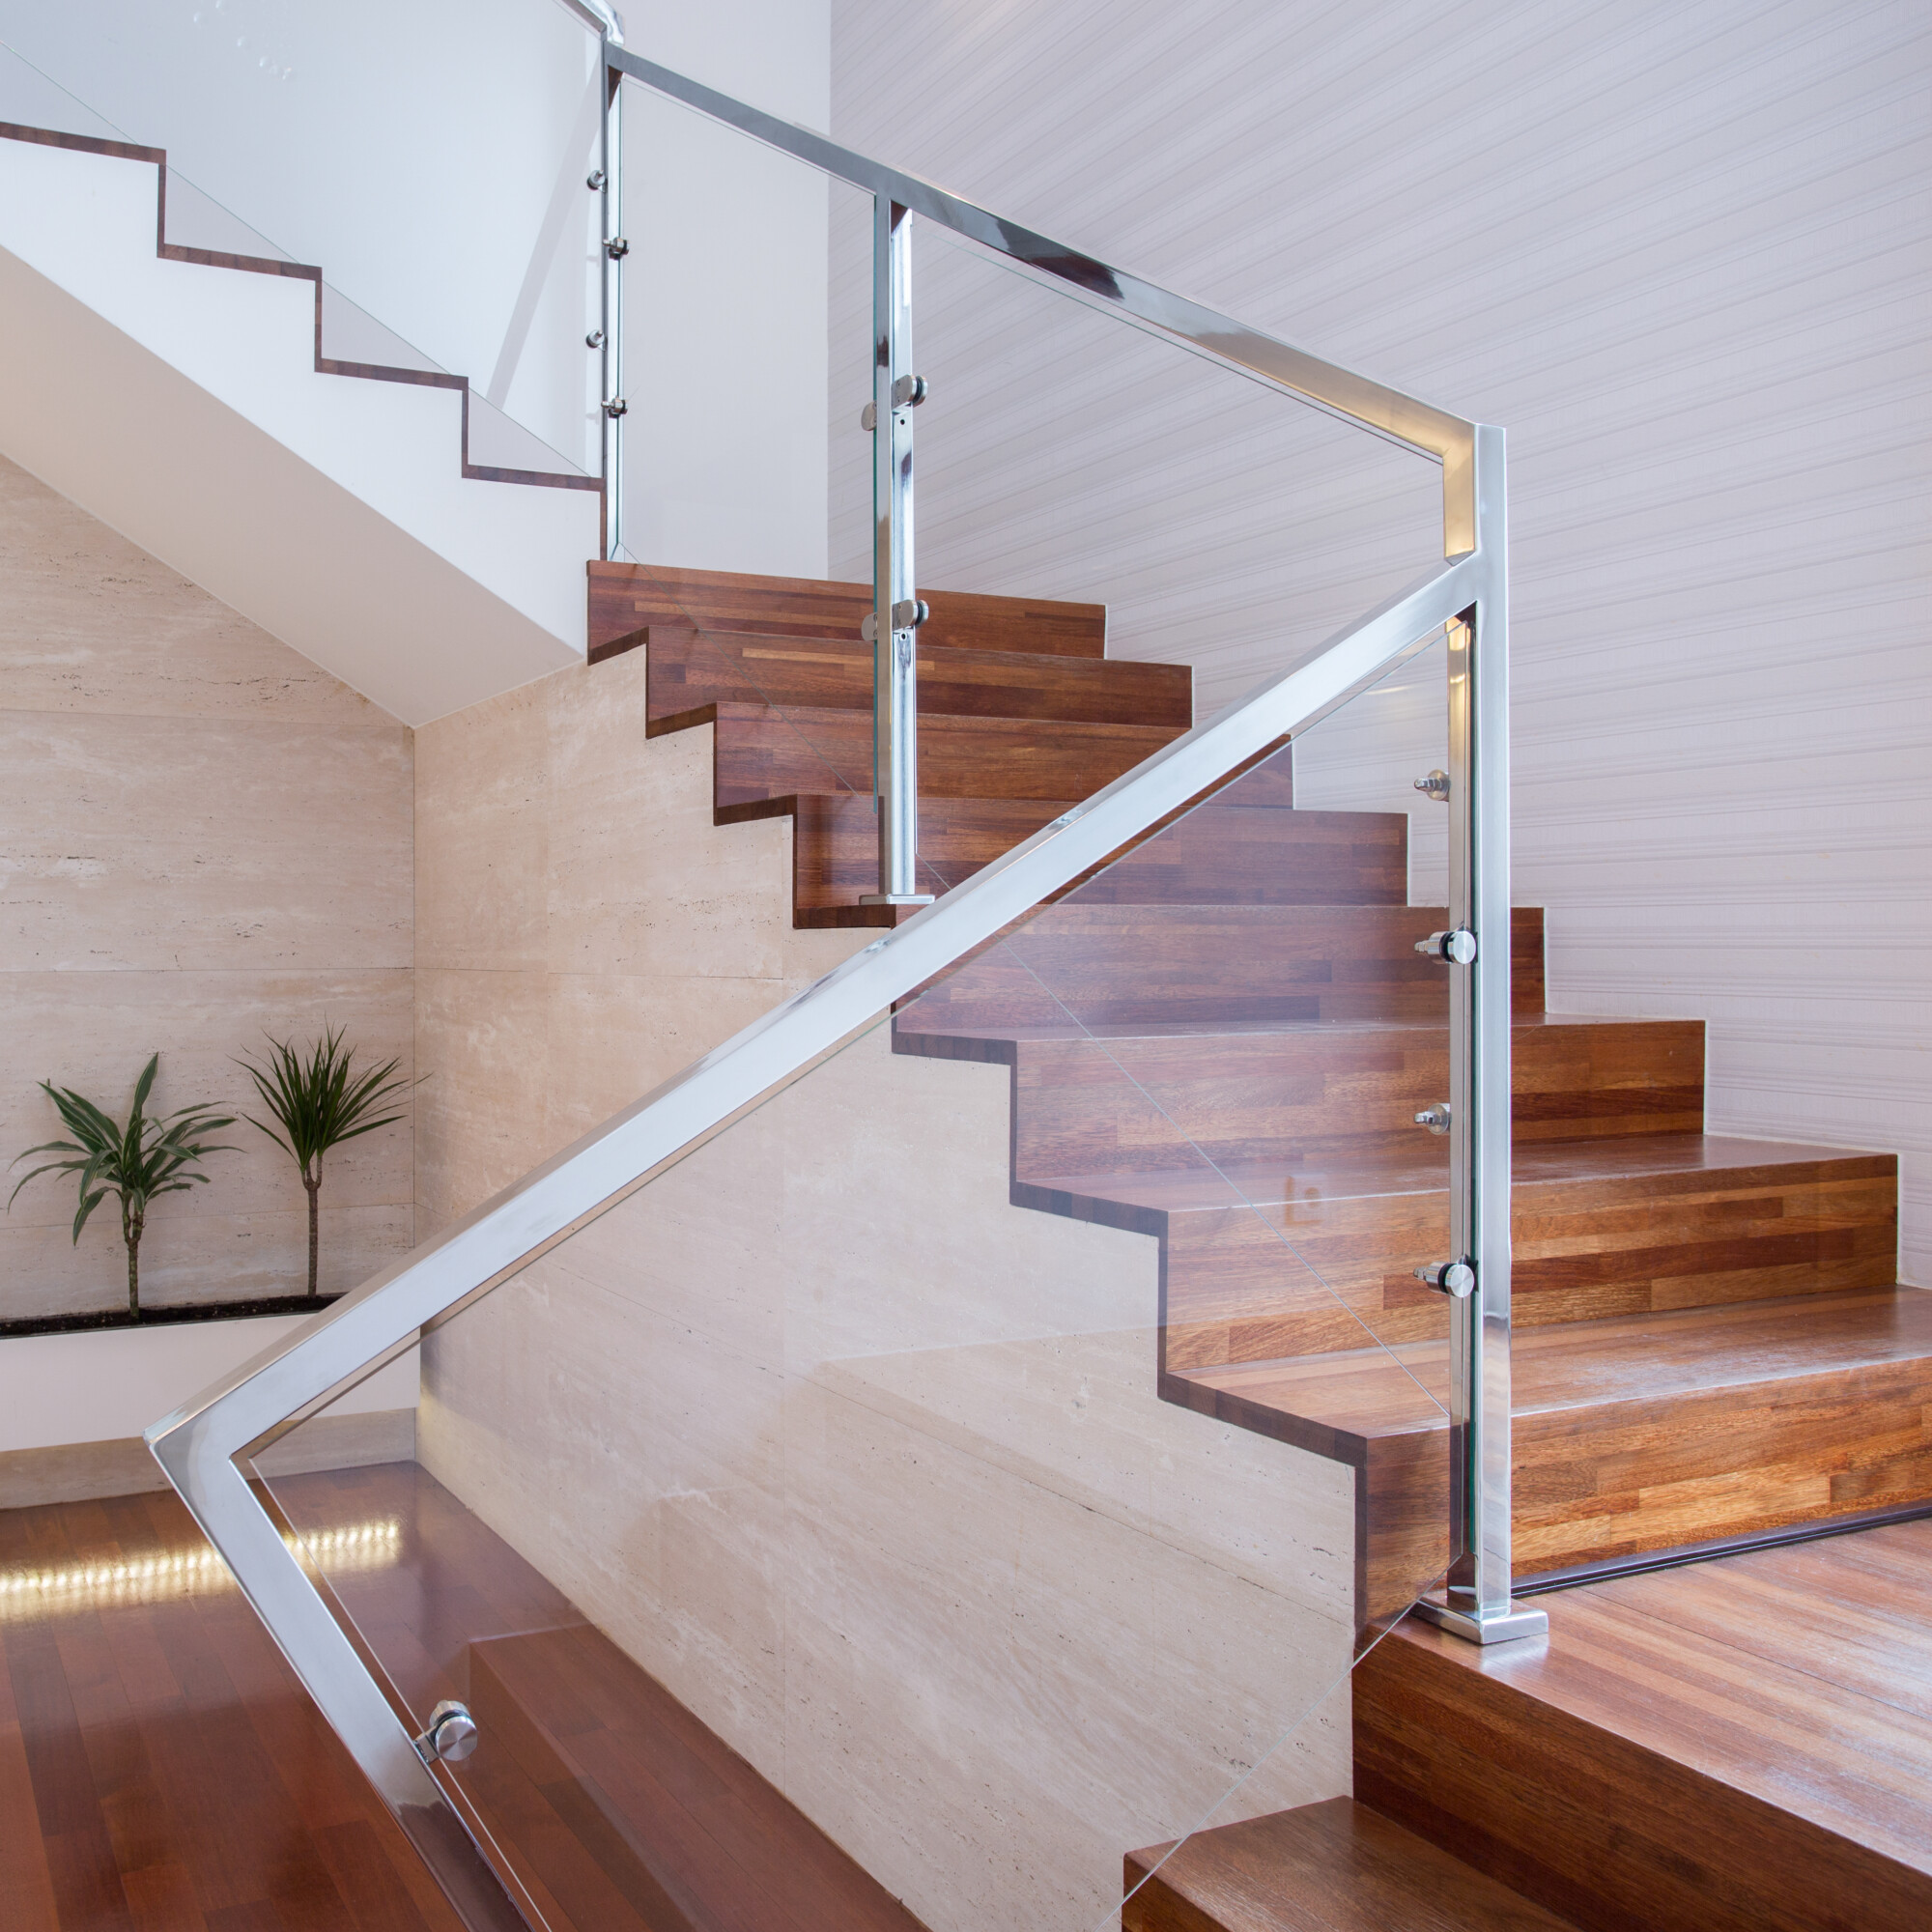 Finding the right railing for your property requires knowing who can offer it. Here is everything you need to know about how to choose a railing supplier.